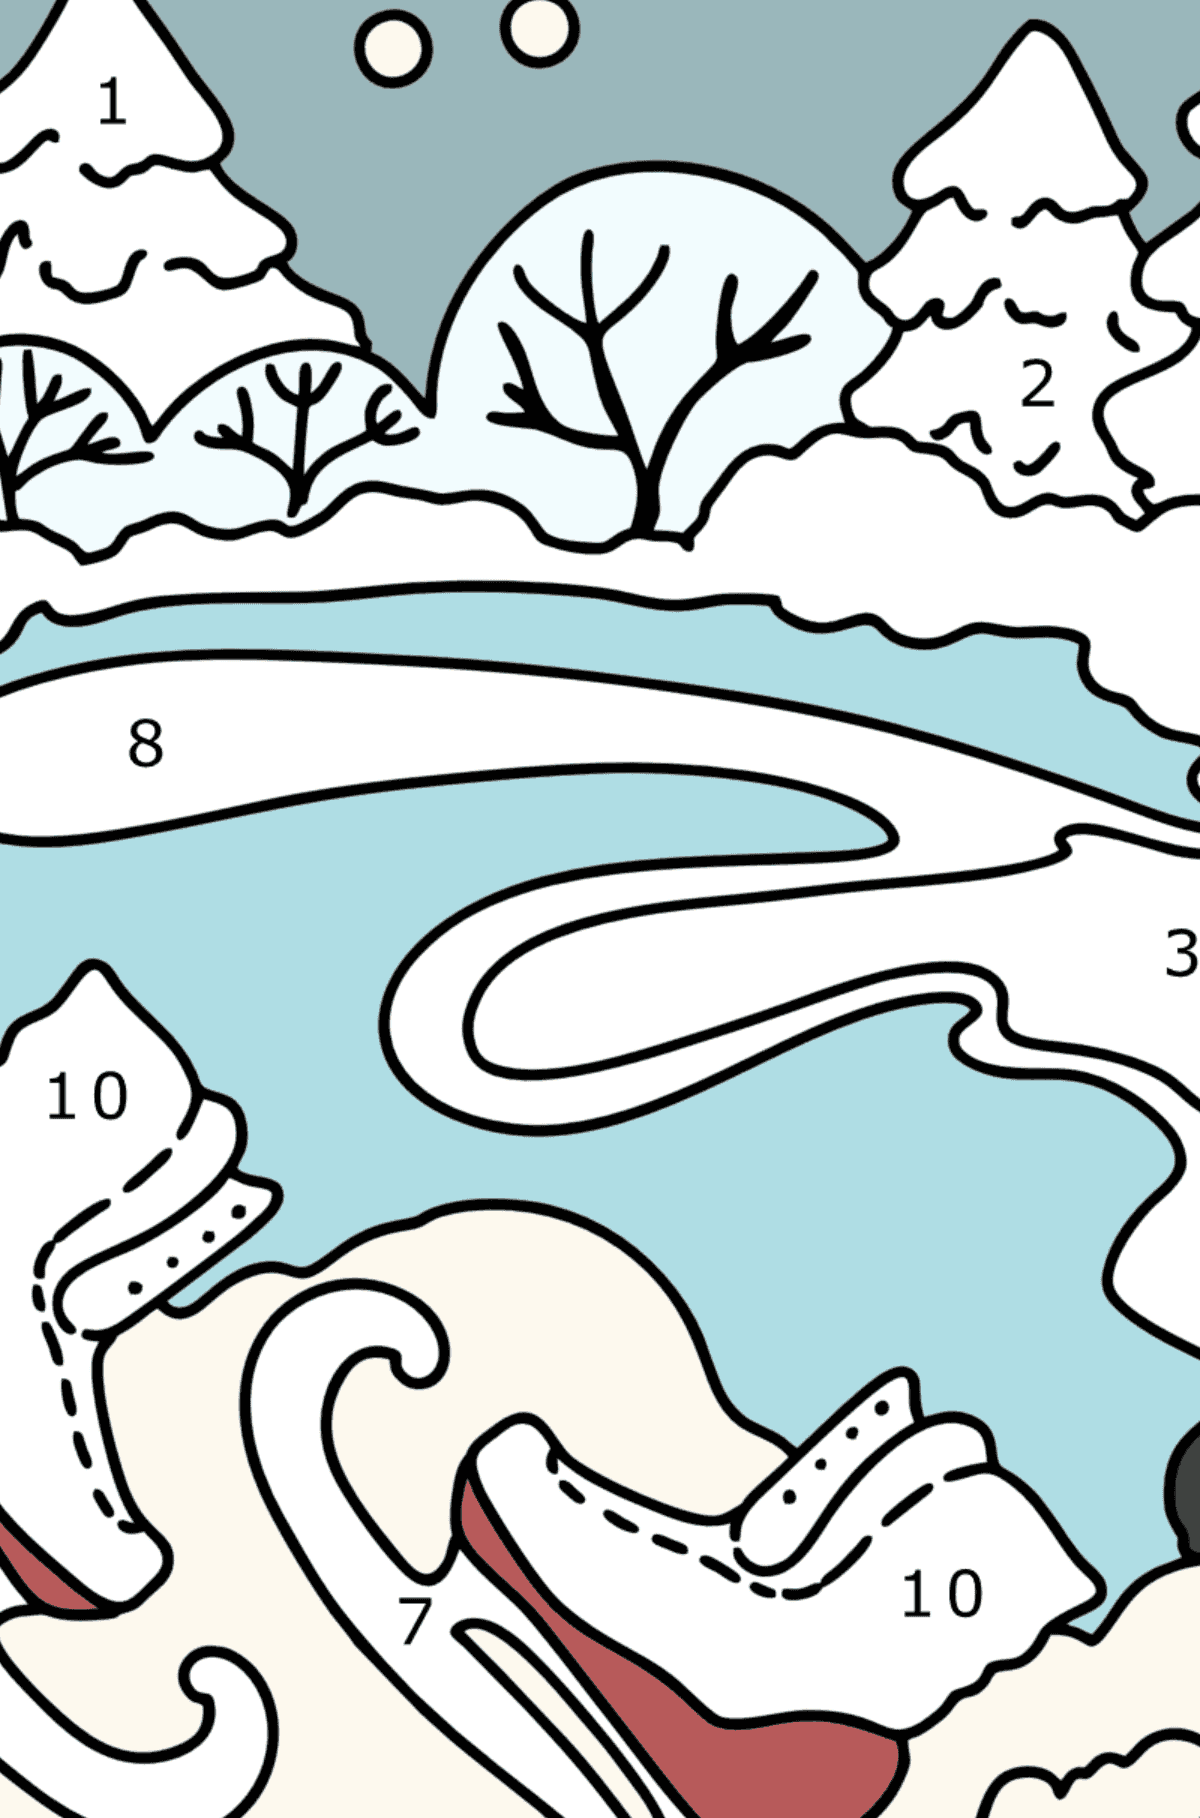 Coloring page - Winter and skates - Coloring by Numbers for Kids